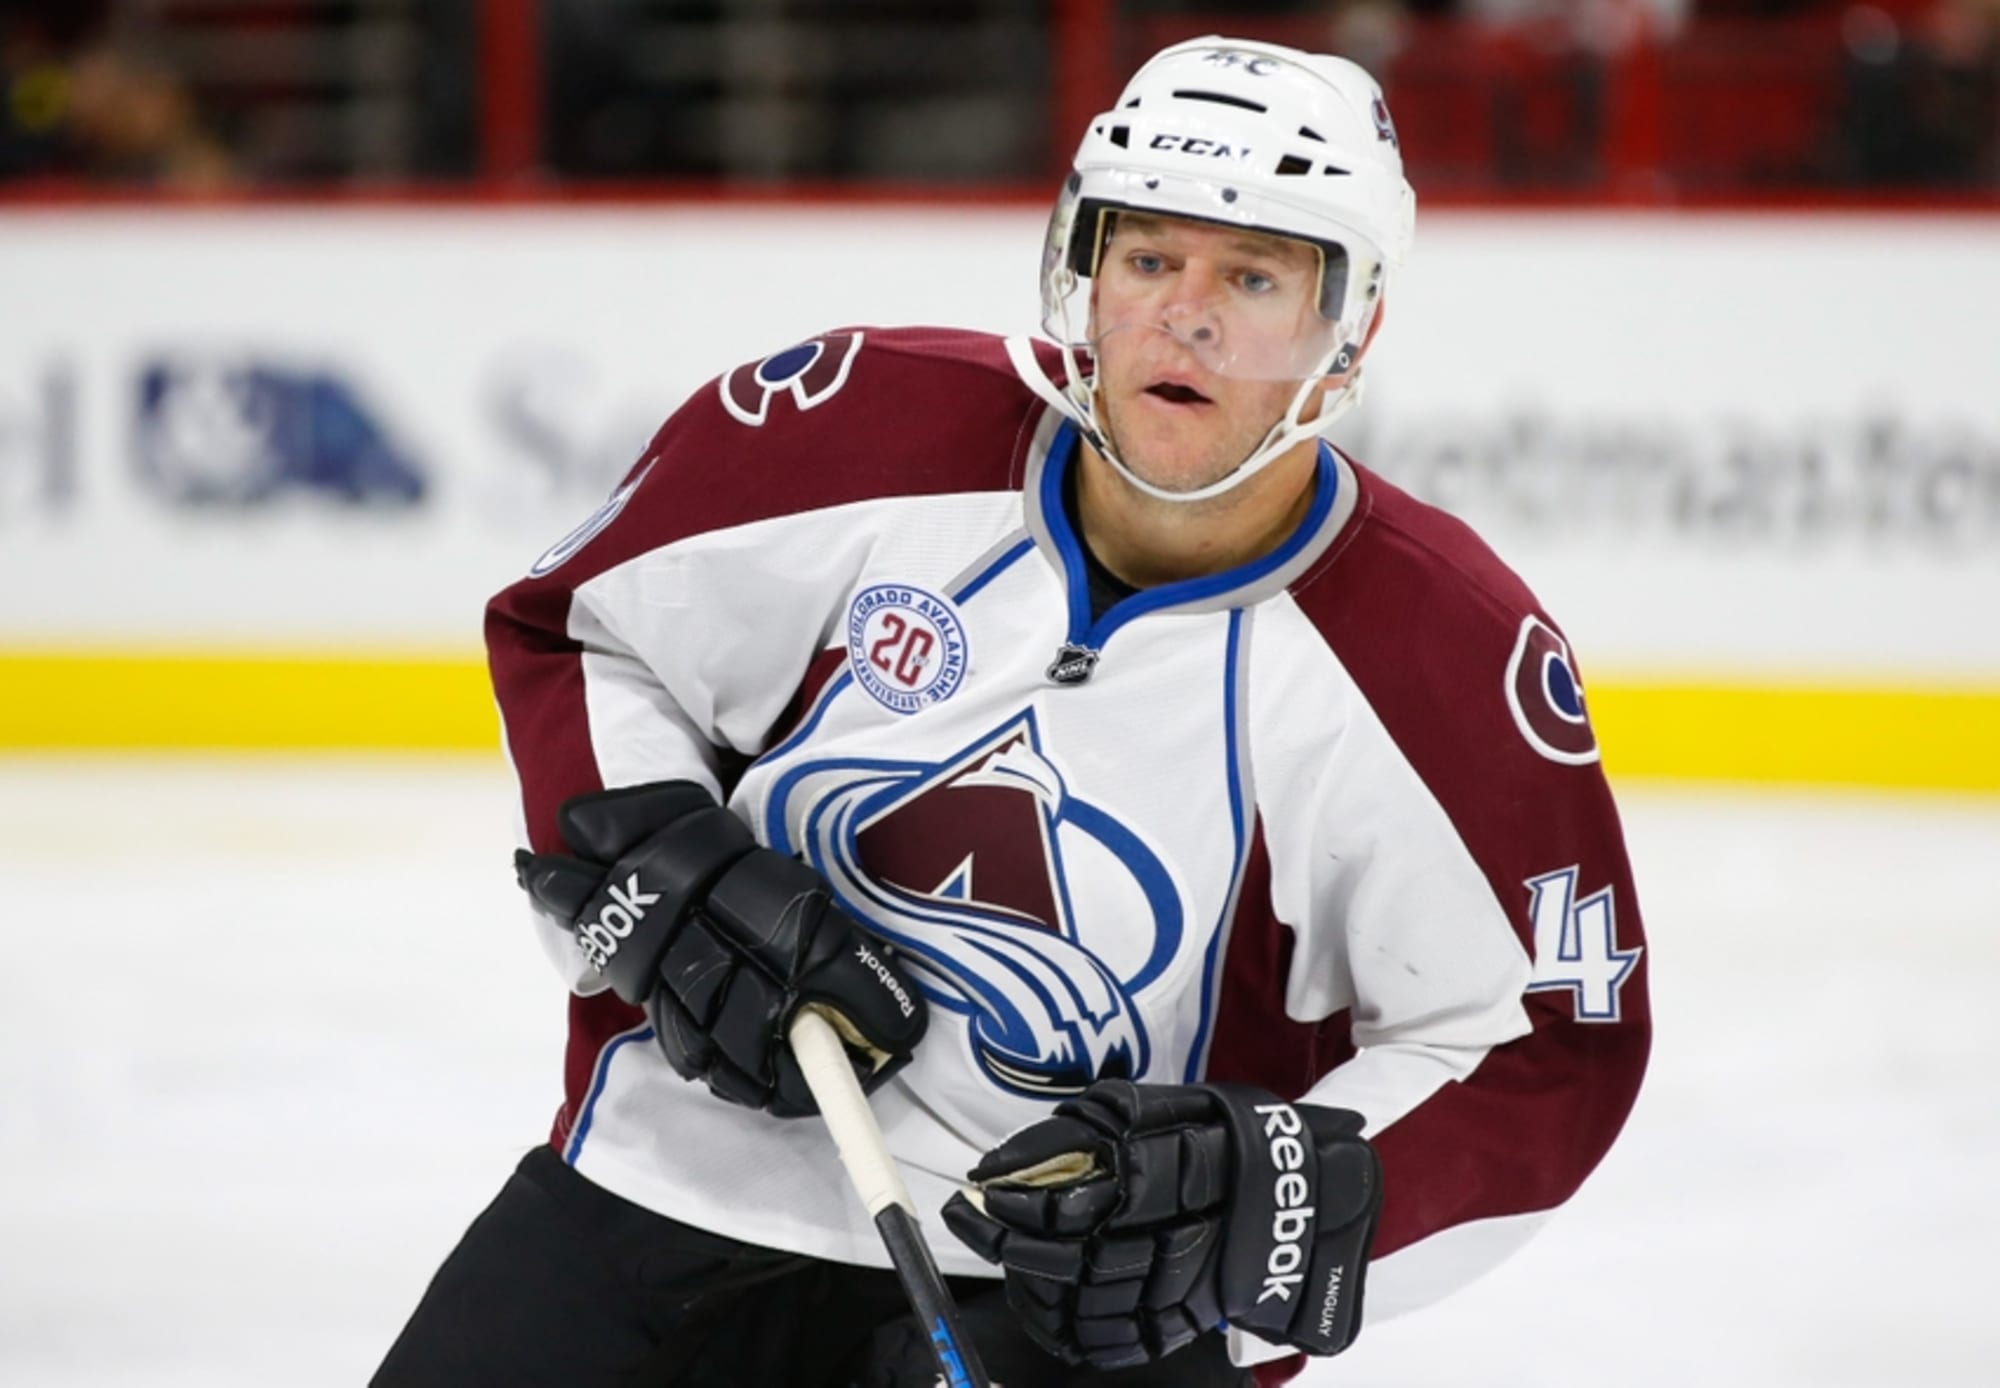 Colorado Avalanche: Is Alex Tanguay Washed Up?